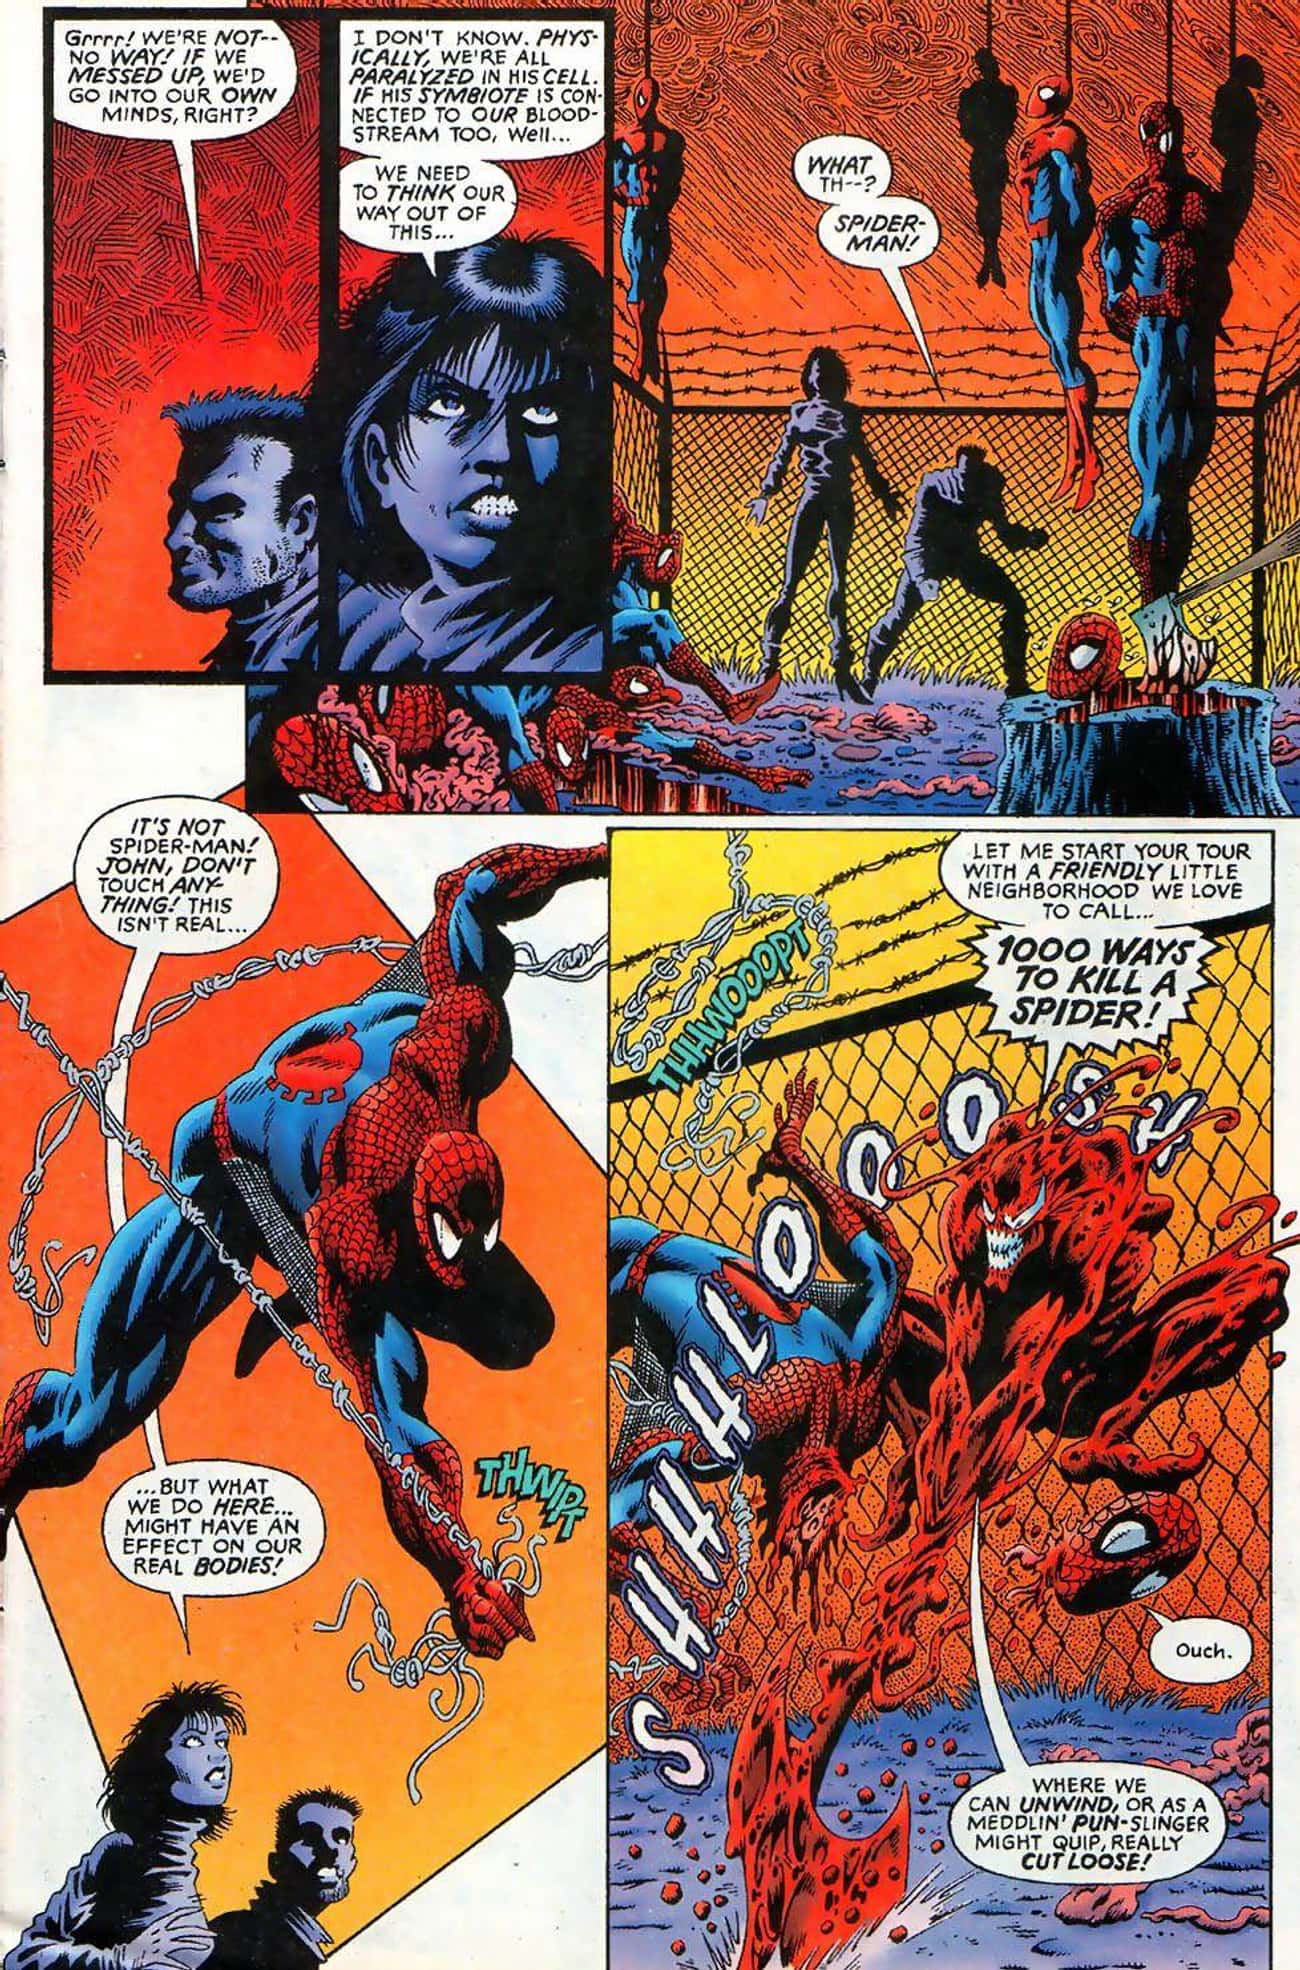 Carnage Mutilates And Decapitates Different Versions Of Spider-Man In His Mind